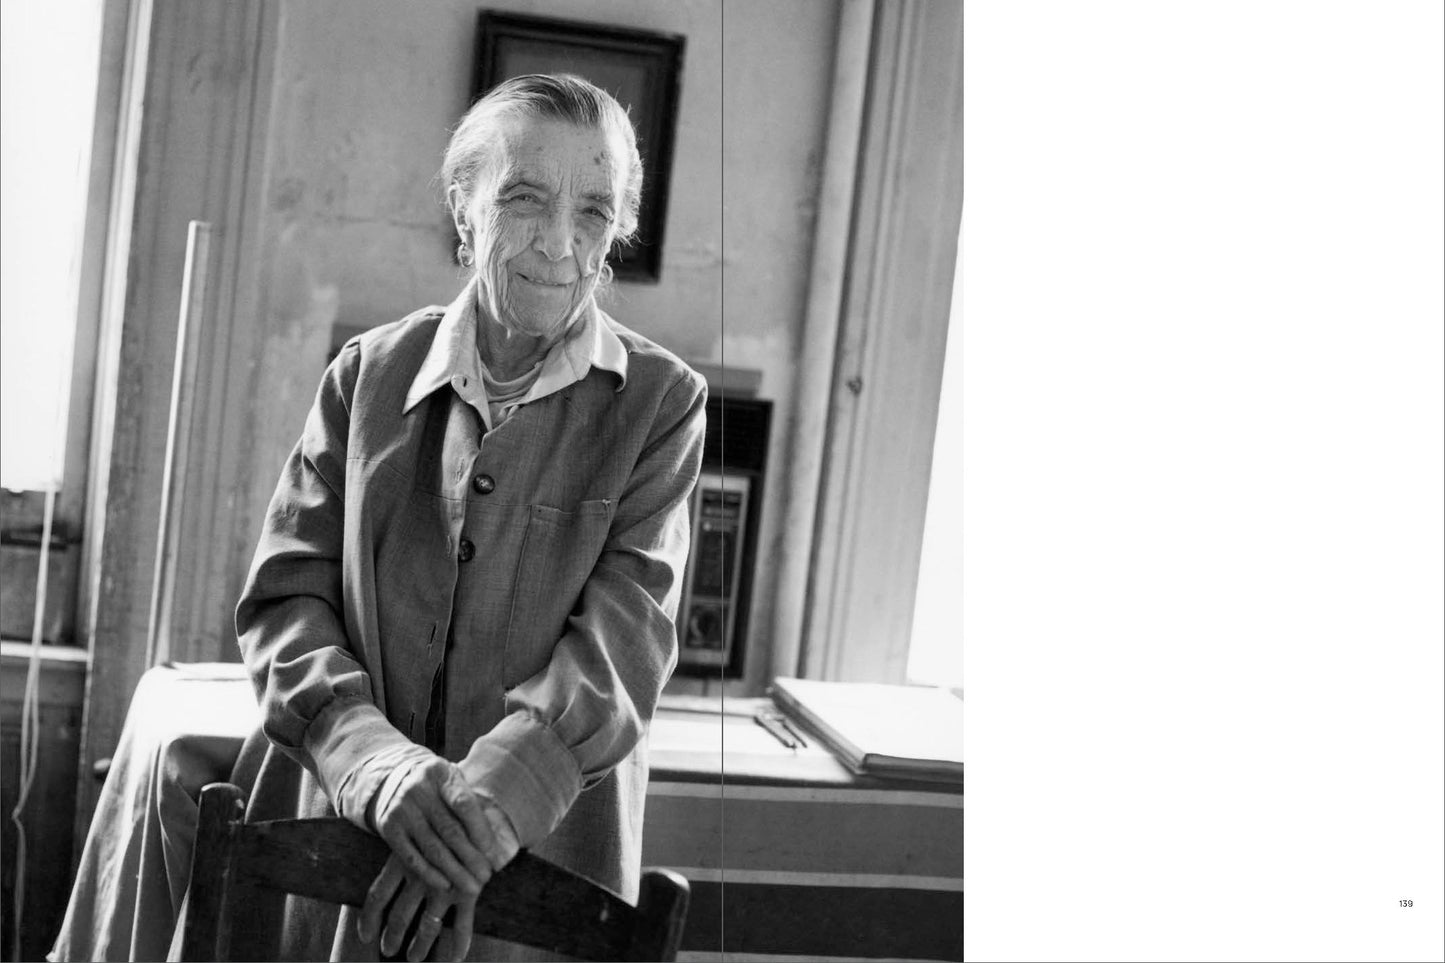 Louise Bourgeois: An Intimate Portrait